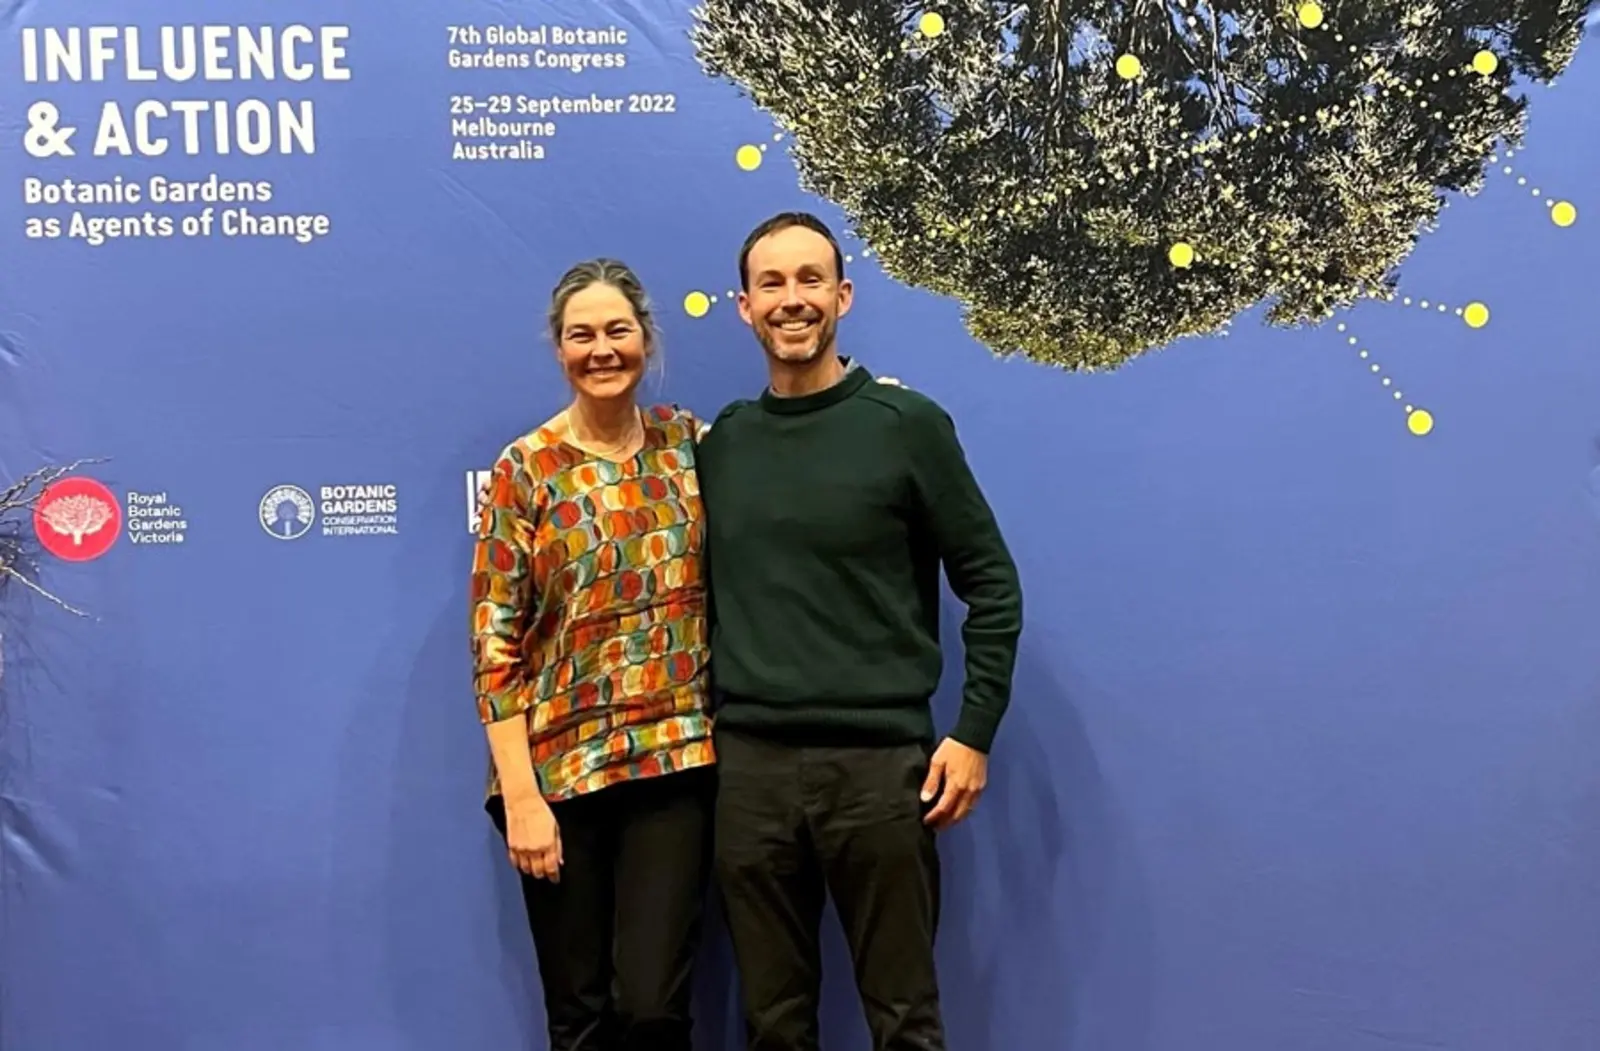 Nicole Cavender and Sean Lahmeyer stand in front of a sign that says, "Influence and Action: Botanic Gardens as Agents of Change."